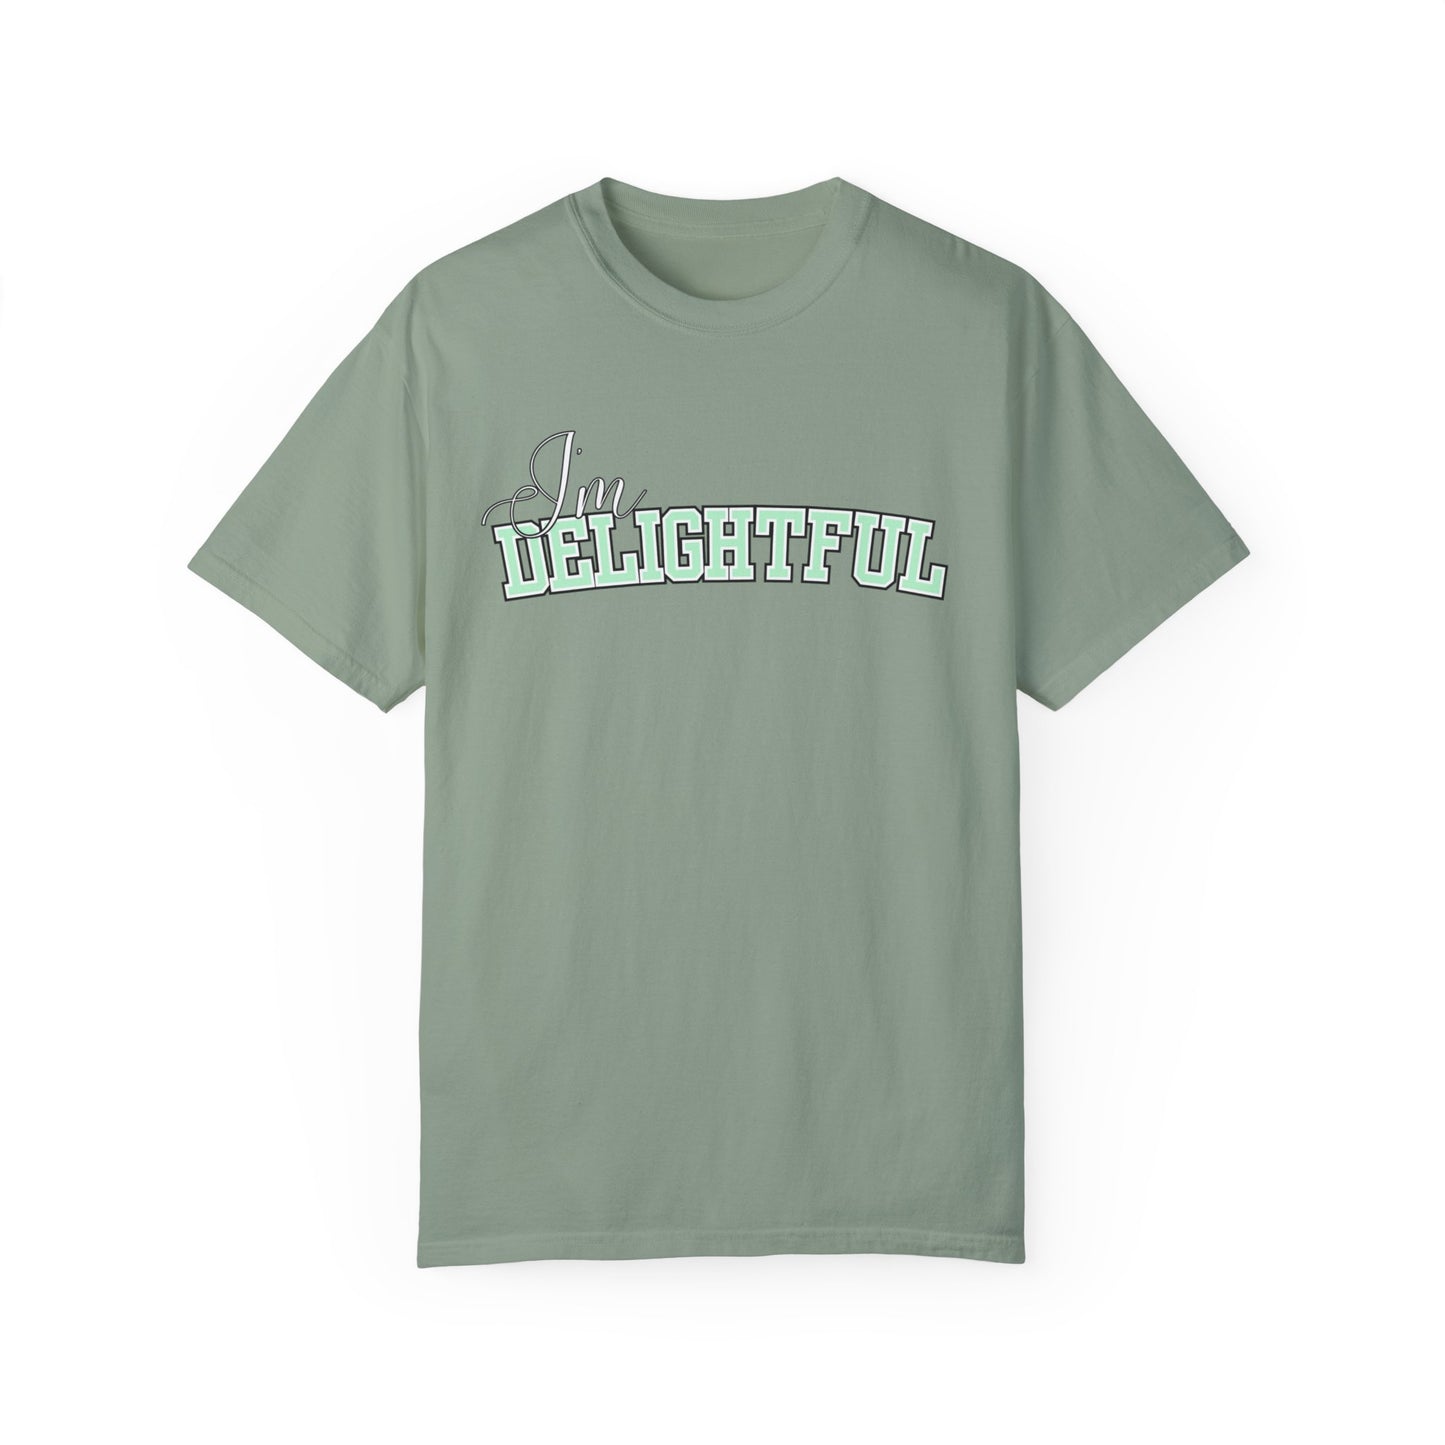 I'm Delightful: Women's Comfort Colors Positive Vibes Tee for Radiant Charm - Eddy and Rita